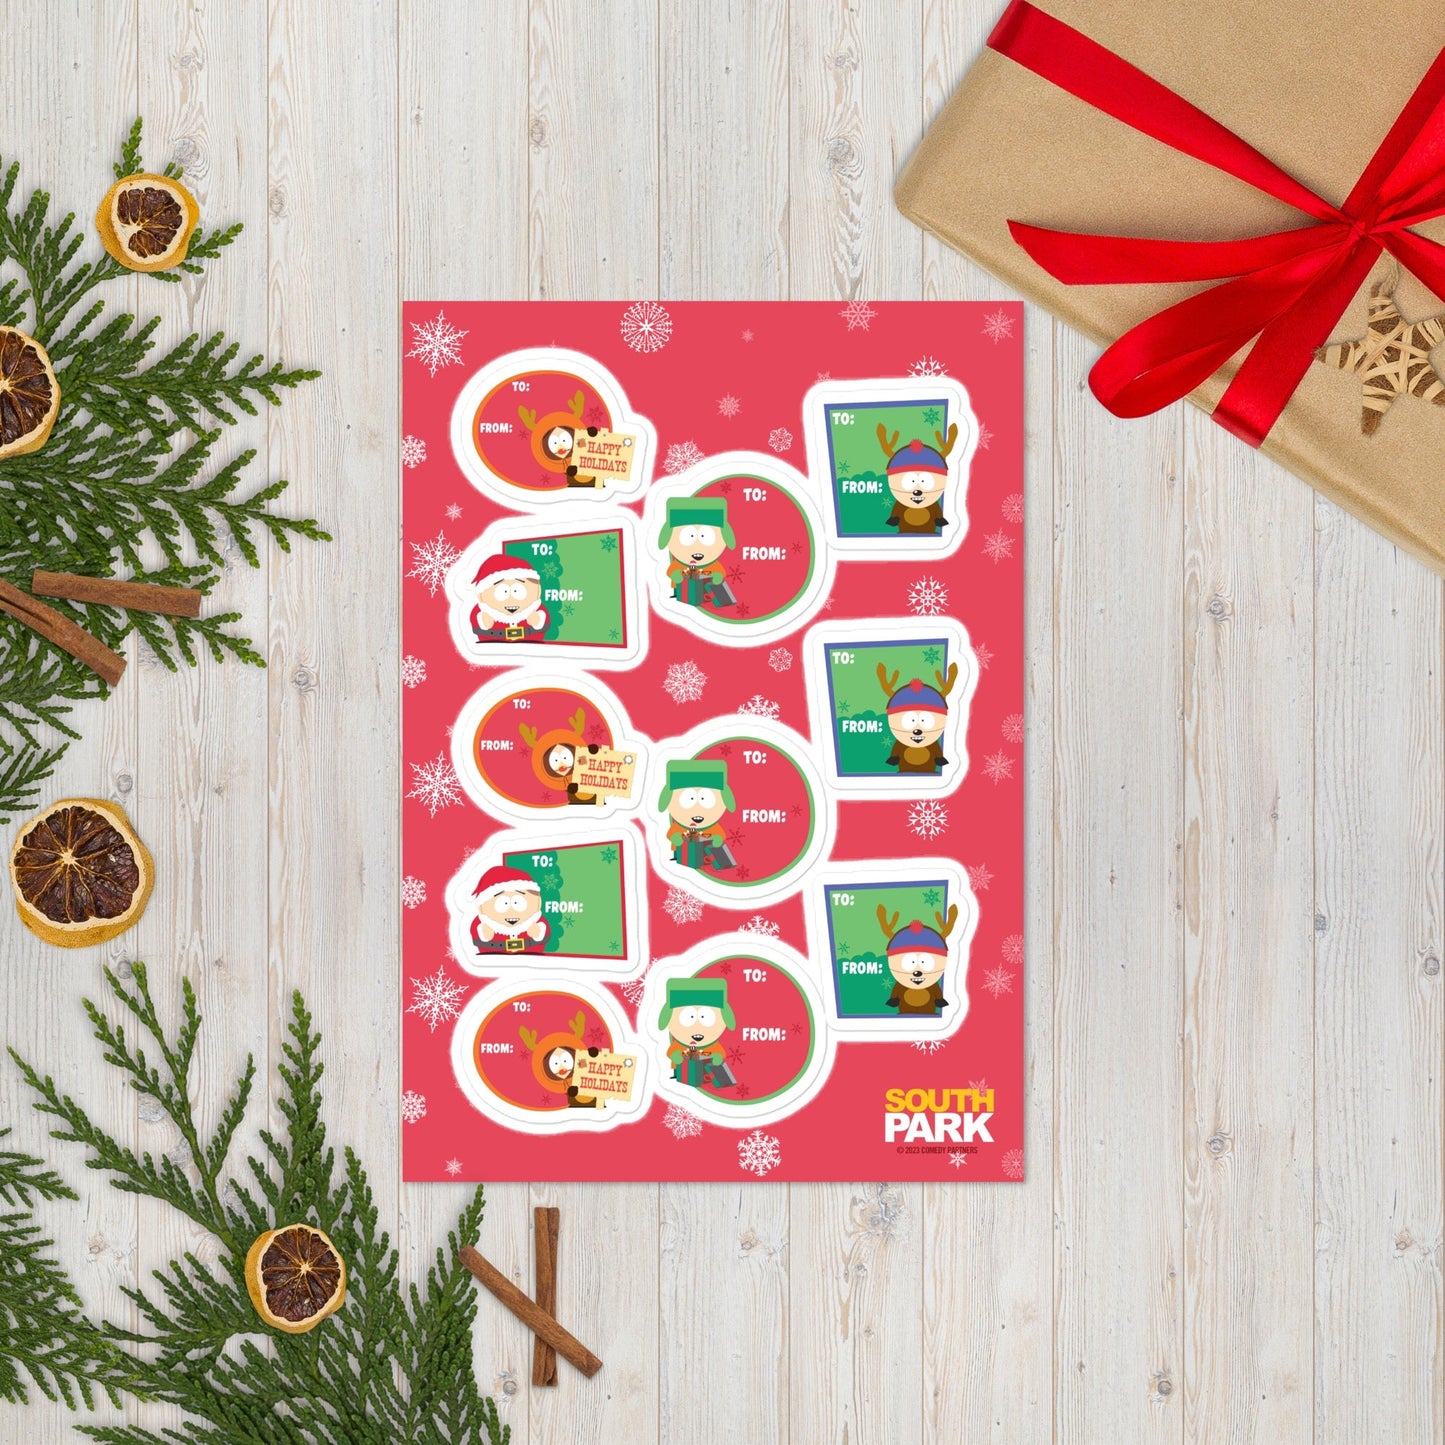 South Park Holiday Gift Label Sticker Sheet - Paramount Shop